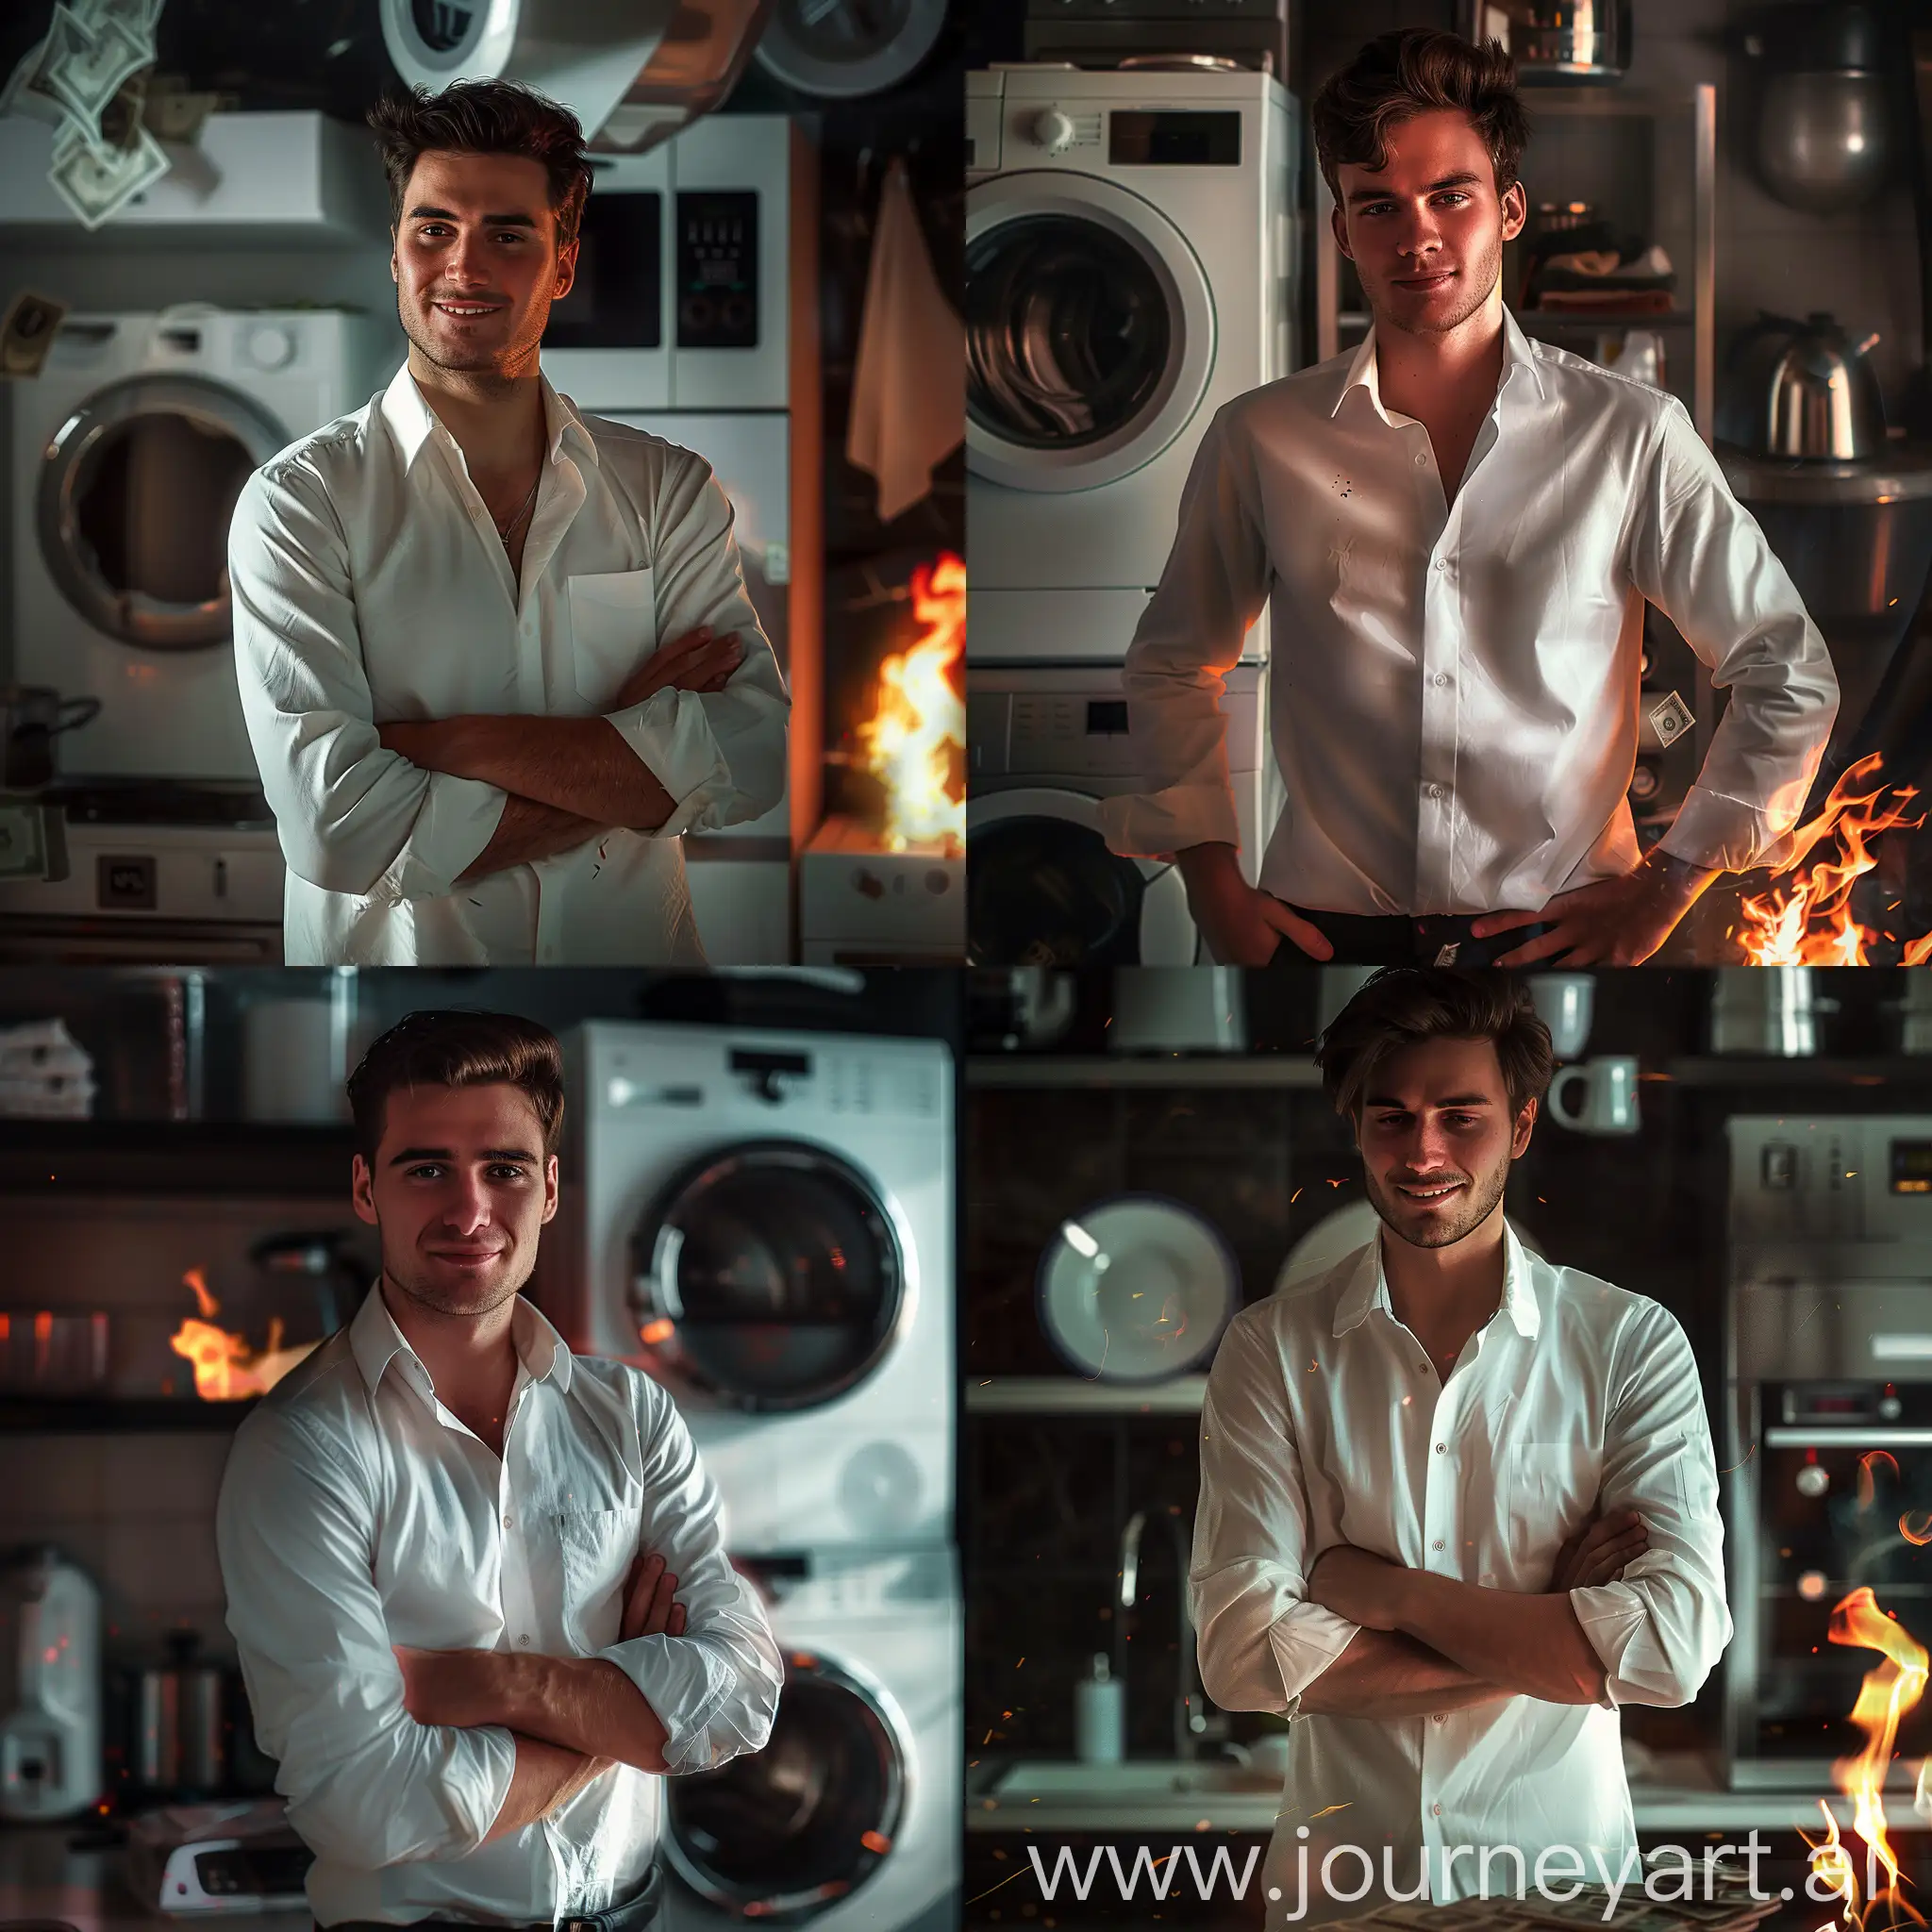 Man-in-White-Shirt-Surrounded-by-Household-Appliances-Burning-Money